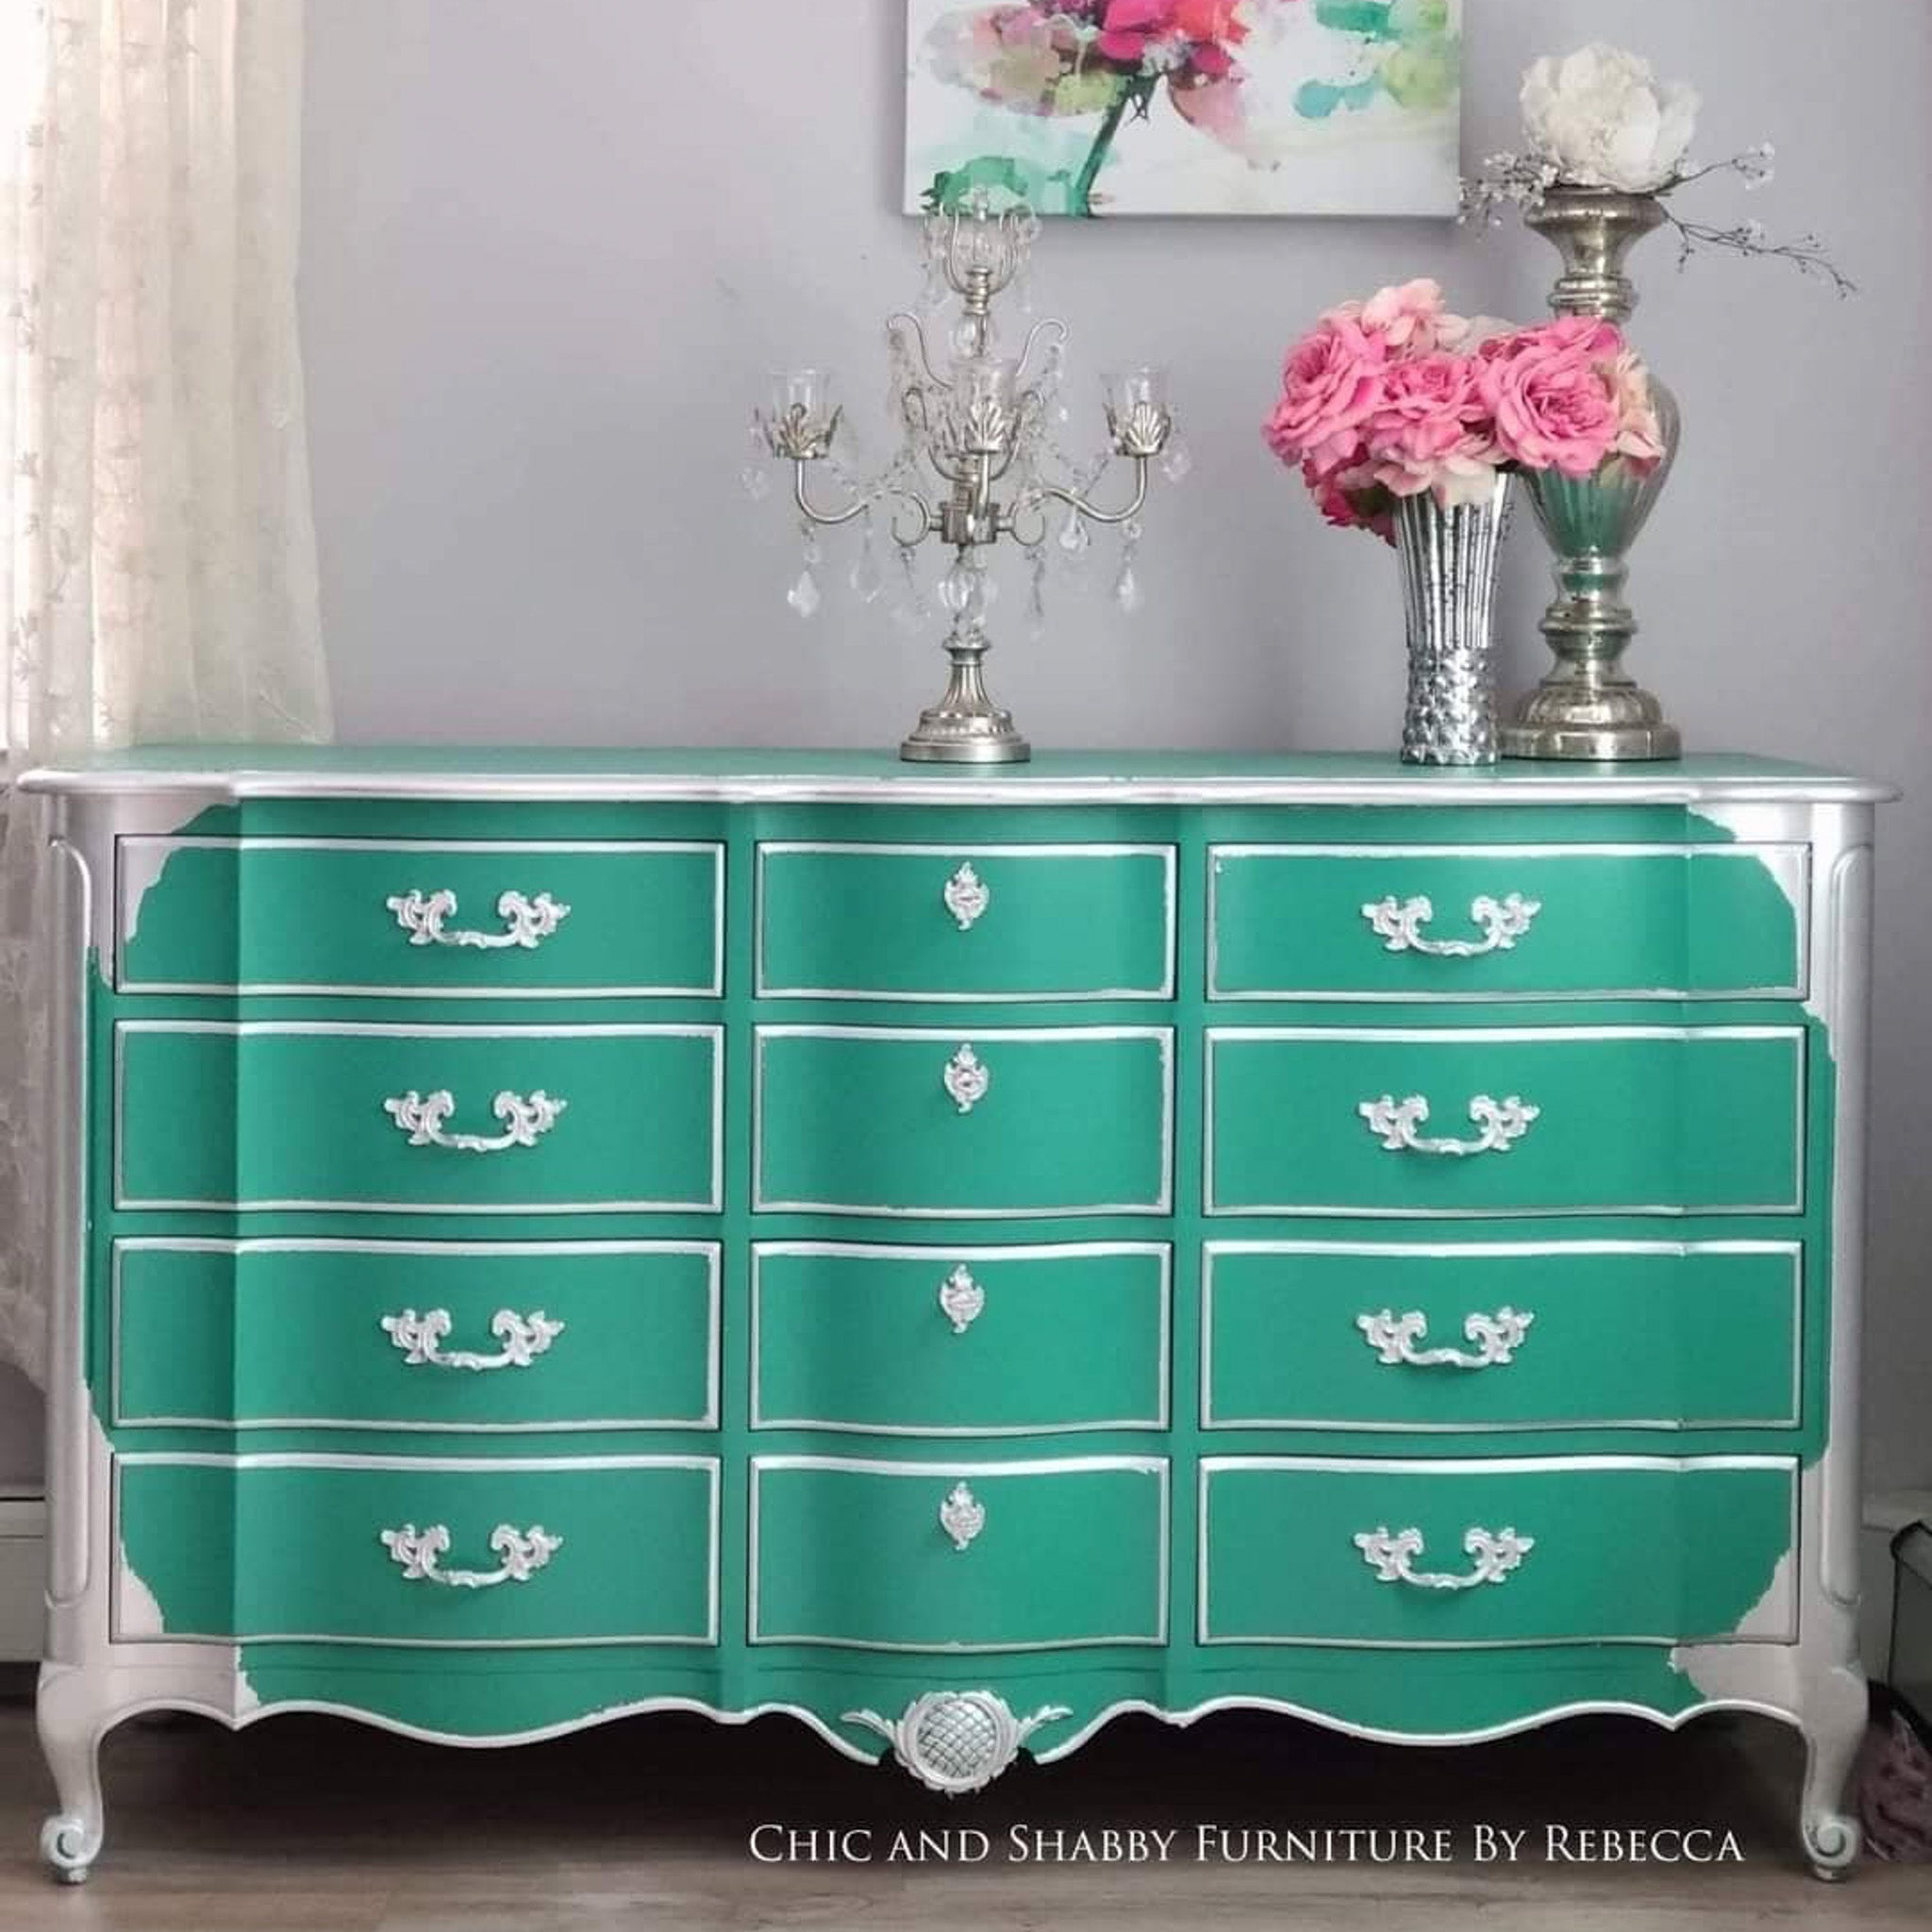 A vintage 12-drawer dresser refurbished by Chic and Shabby Furnitue by Rebecca is painted in Dixie Belle's Mermaid Tail chalk mineral paint and has a surrounding framing paint of silver.